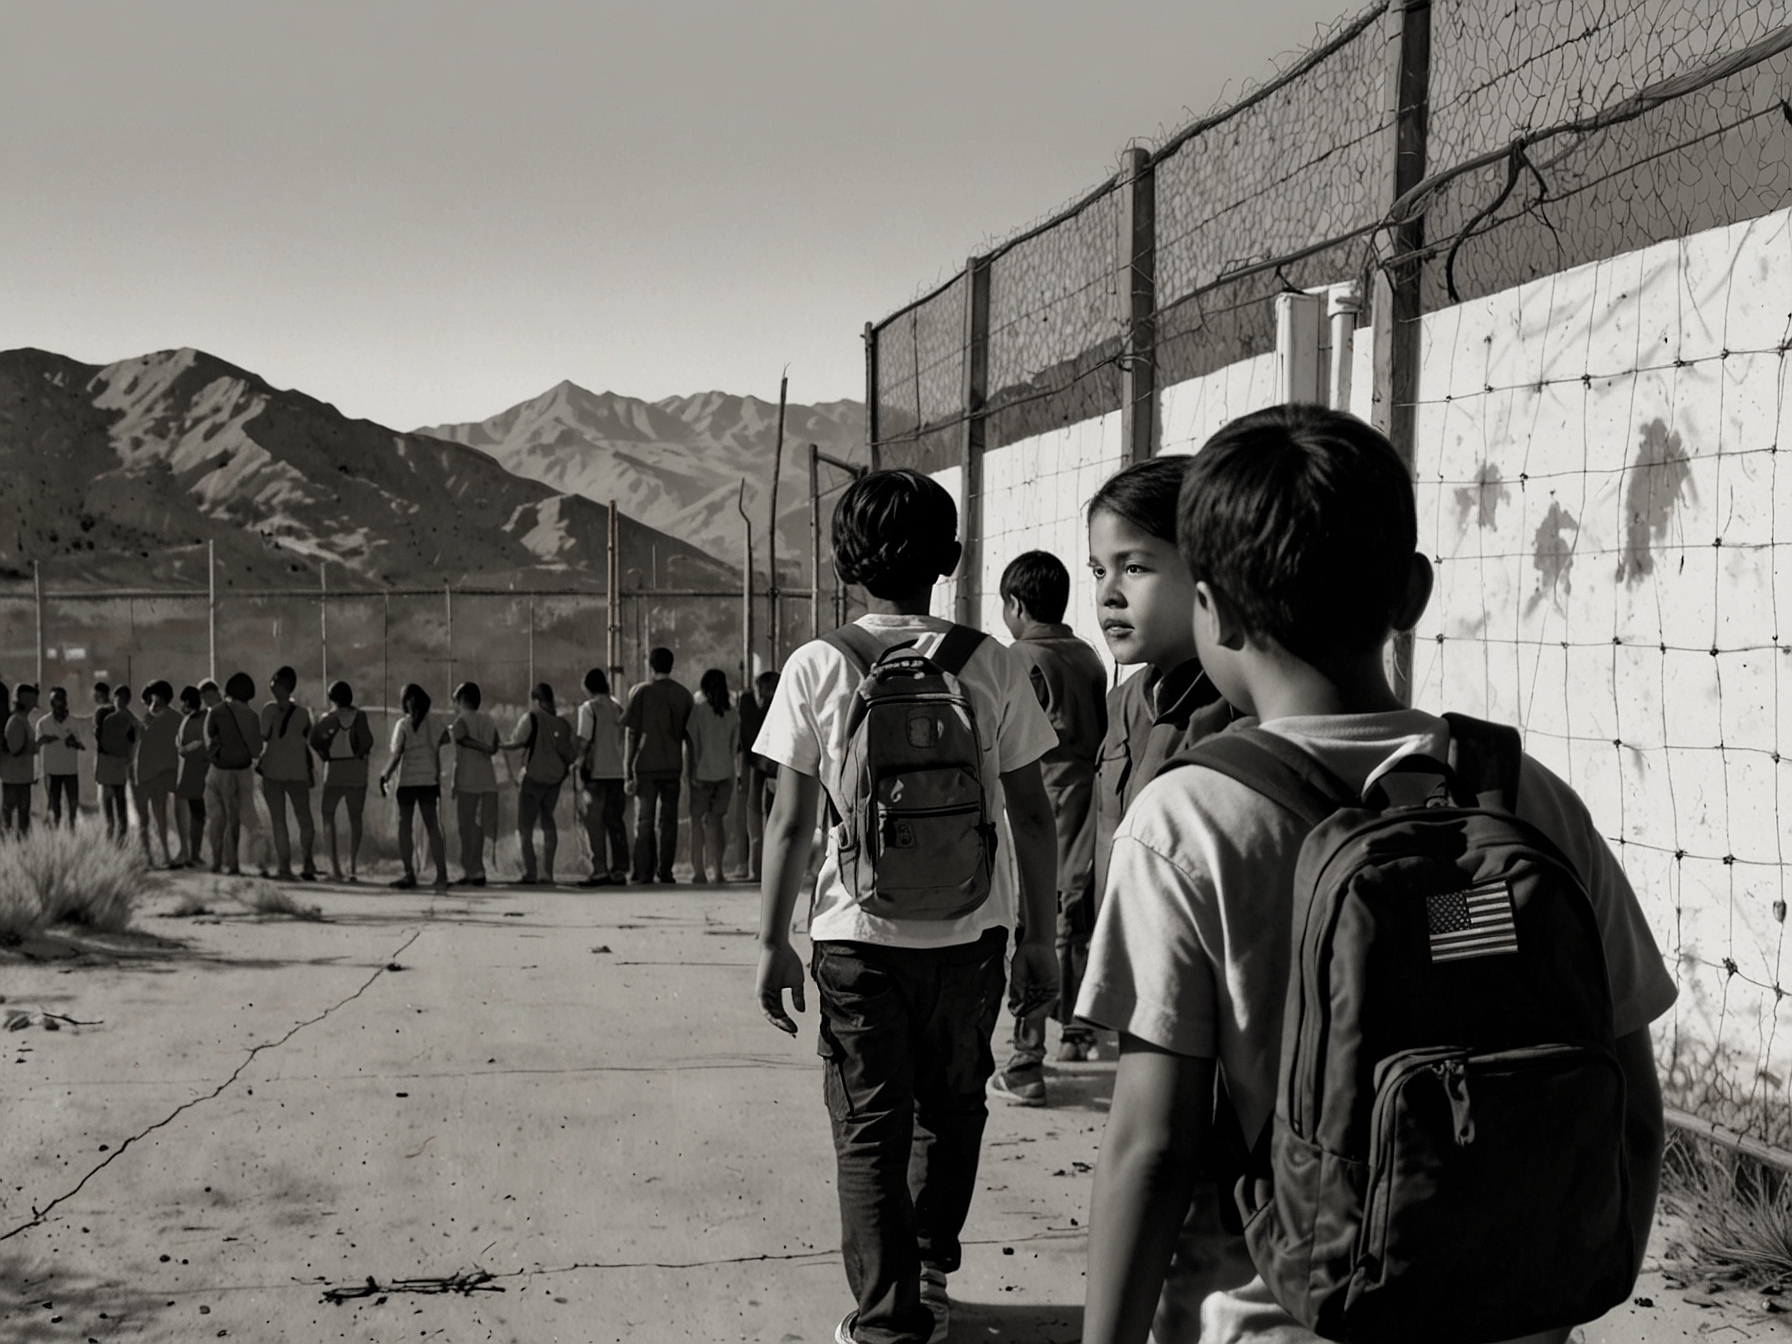 A poignant photograph of unaccompanied migrant children at a U.S. border facility, highlighting the ongoing humanitarian and legal challenges addressed by the Flores Settlement Agreement.